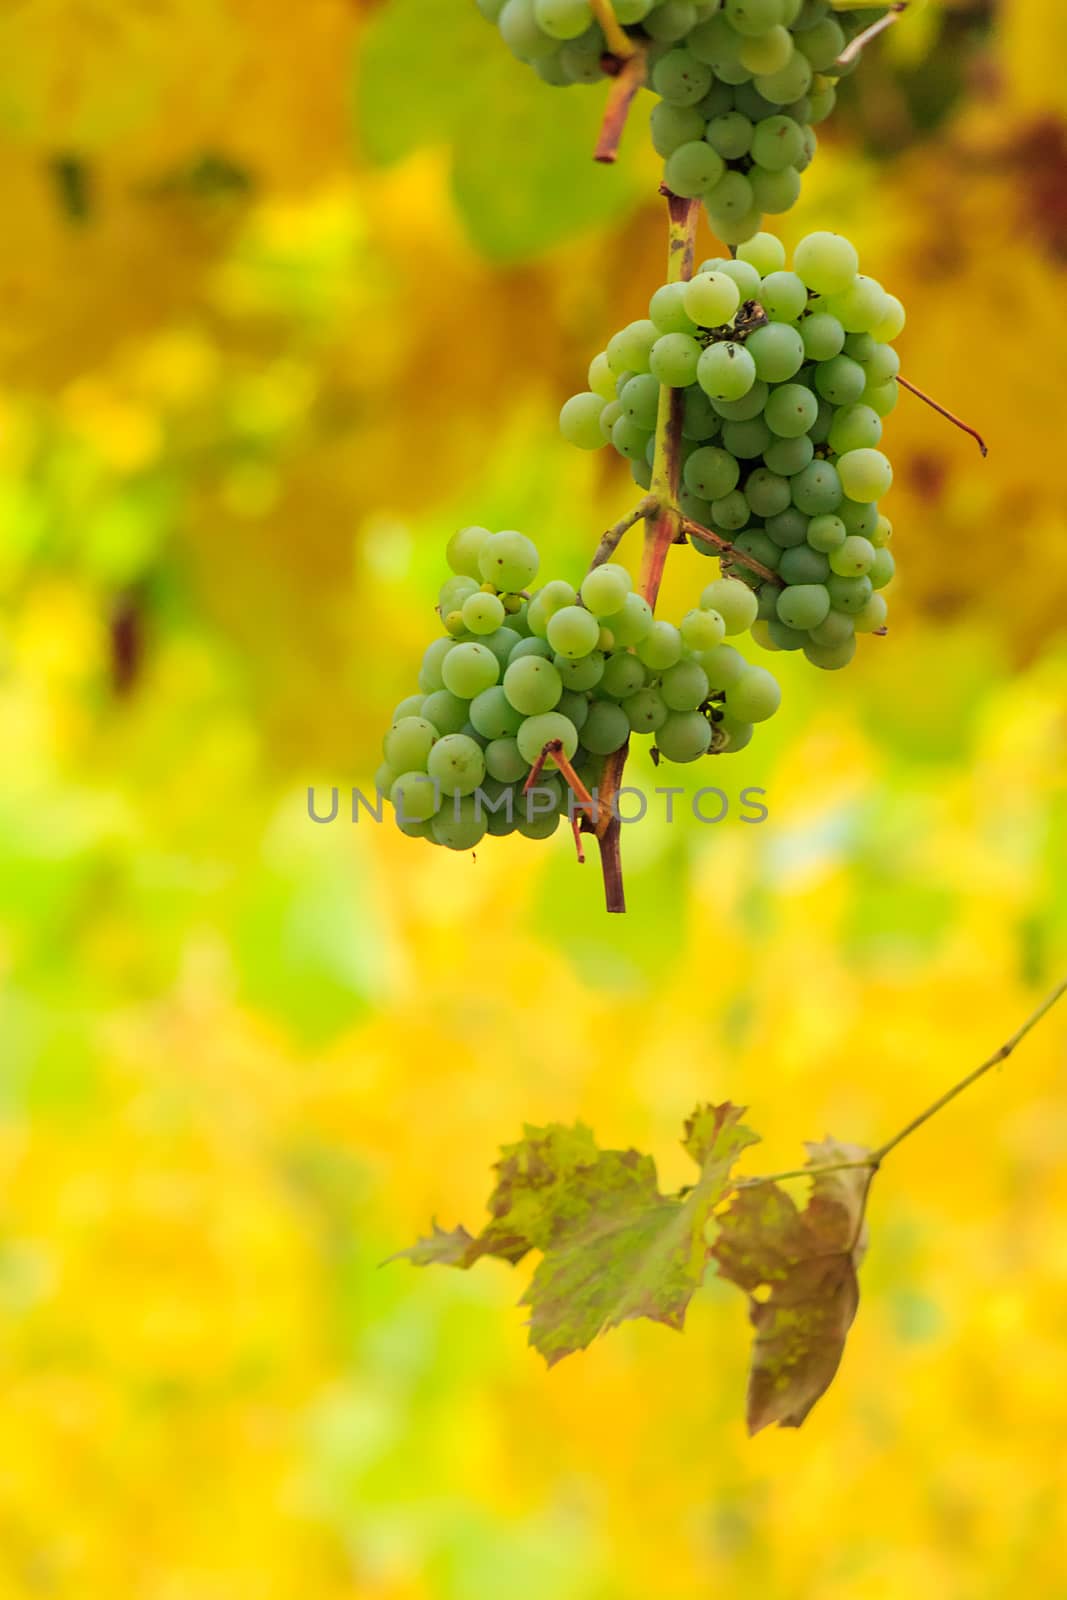 white grapes on vineyard blurred background by Pellinni